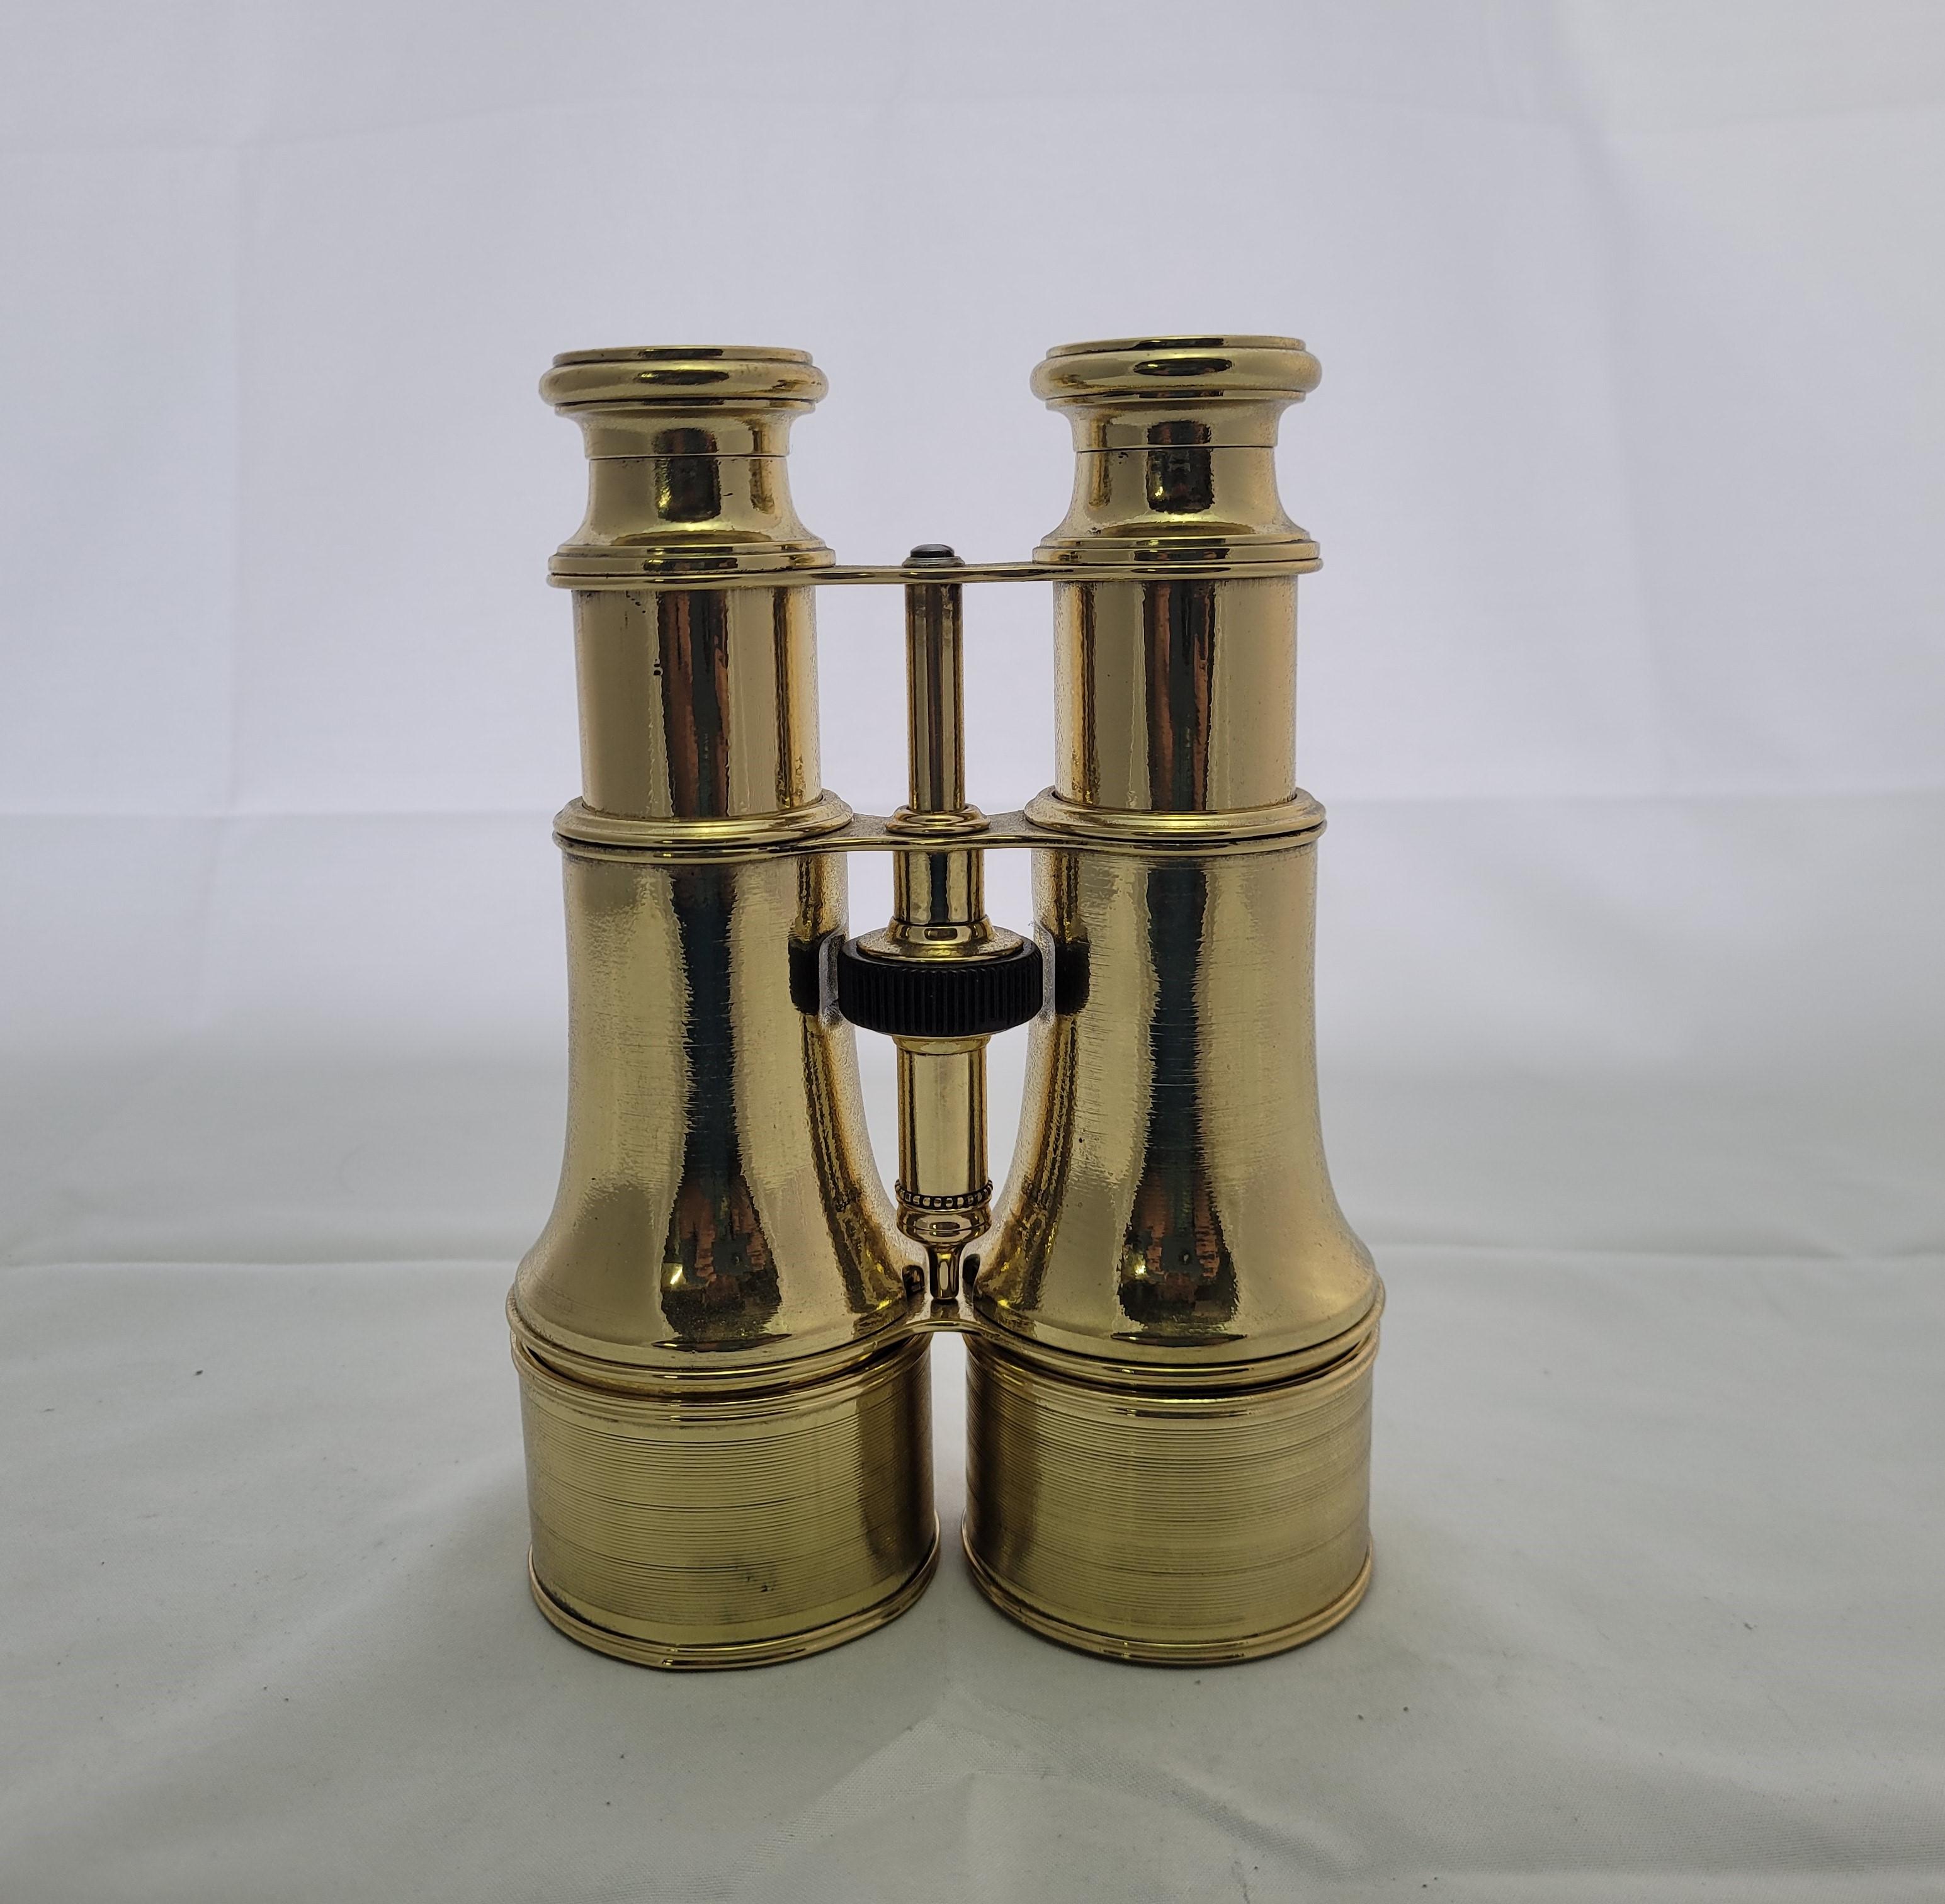 North American French Yachting Binoculars by Lemaire Fabt, Paris